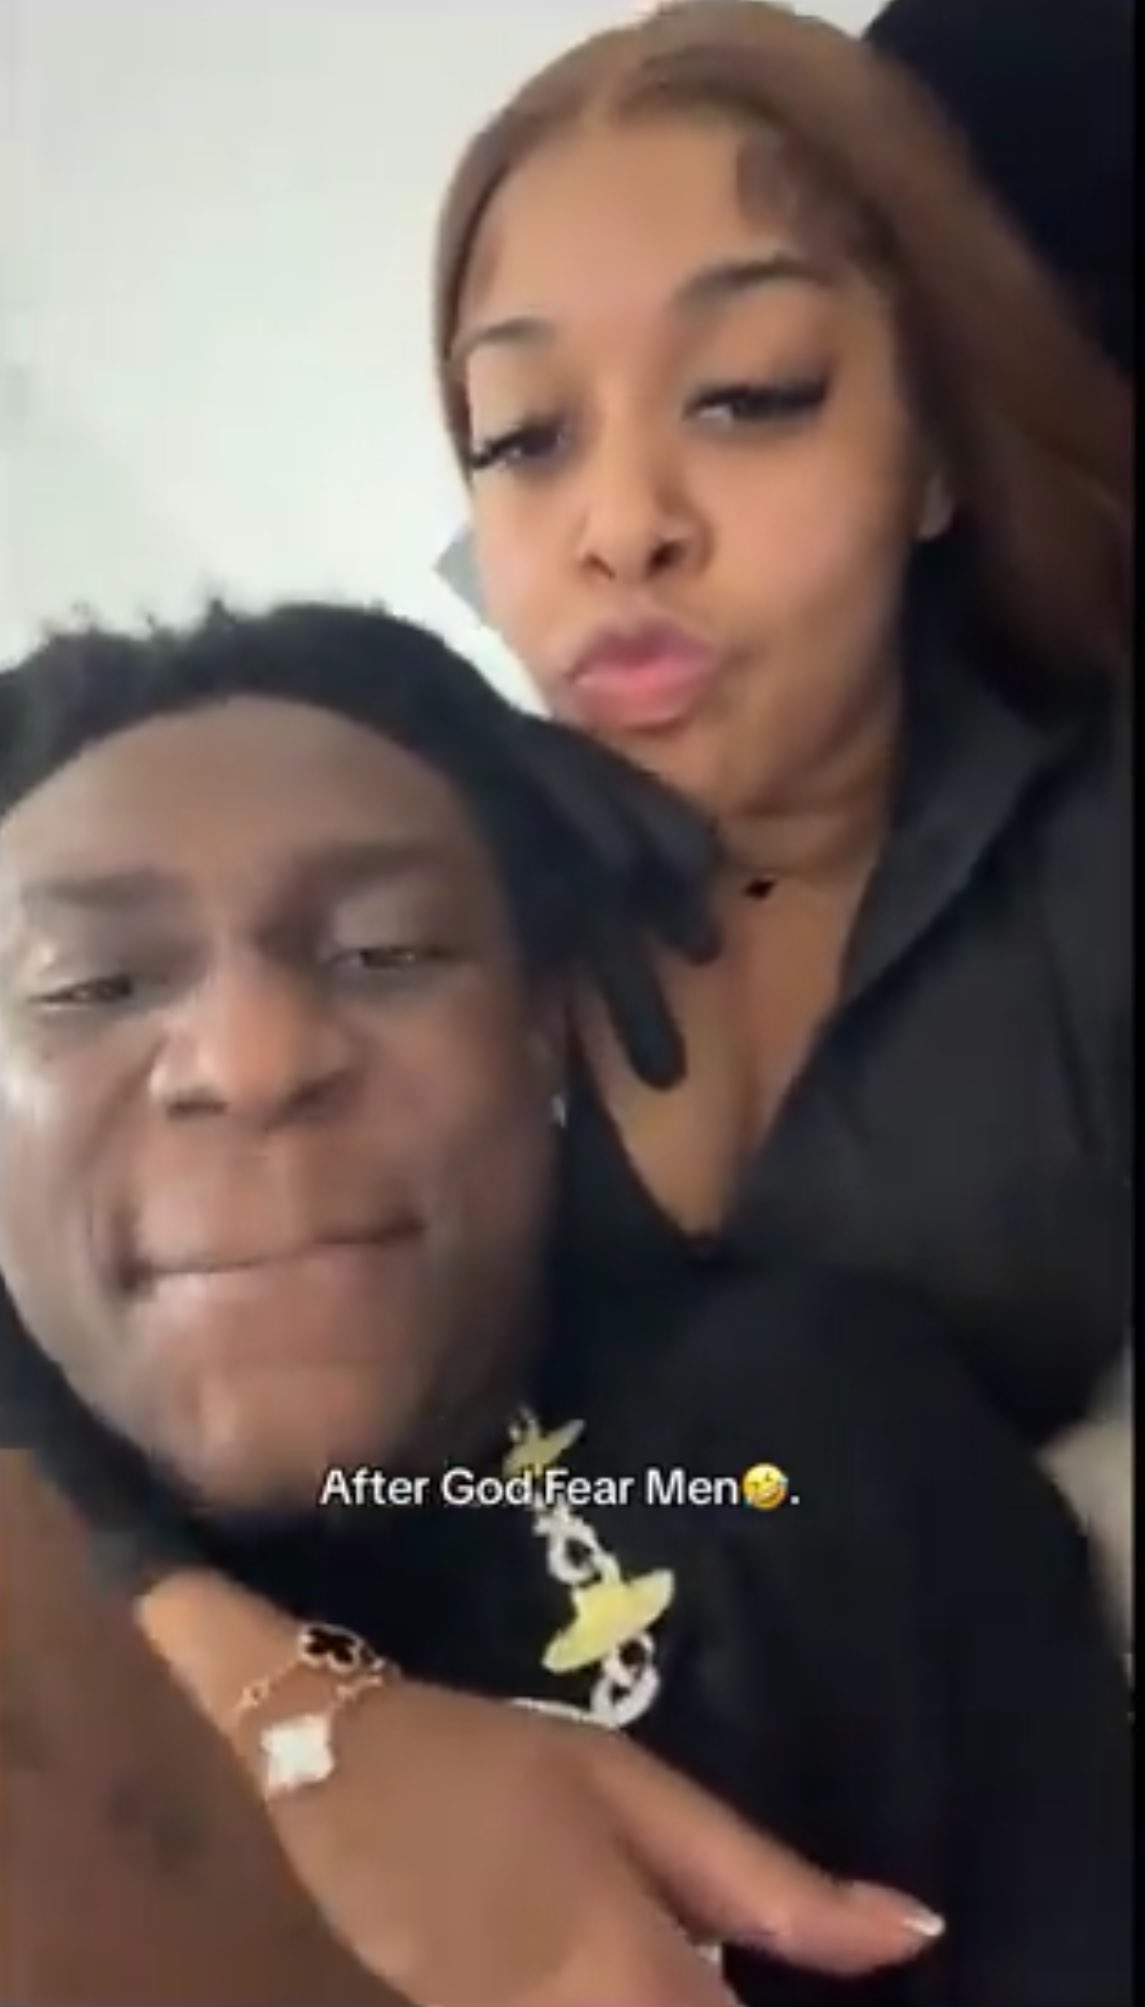 After God, fear men - UK-based lady says as she shares her loved-up video with singer Shallipopi after a video of him at a restaurant with another lady trended